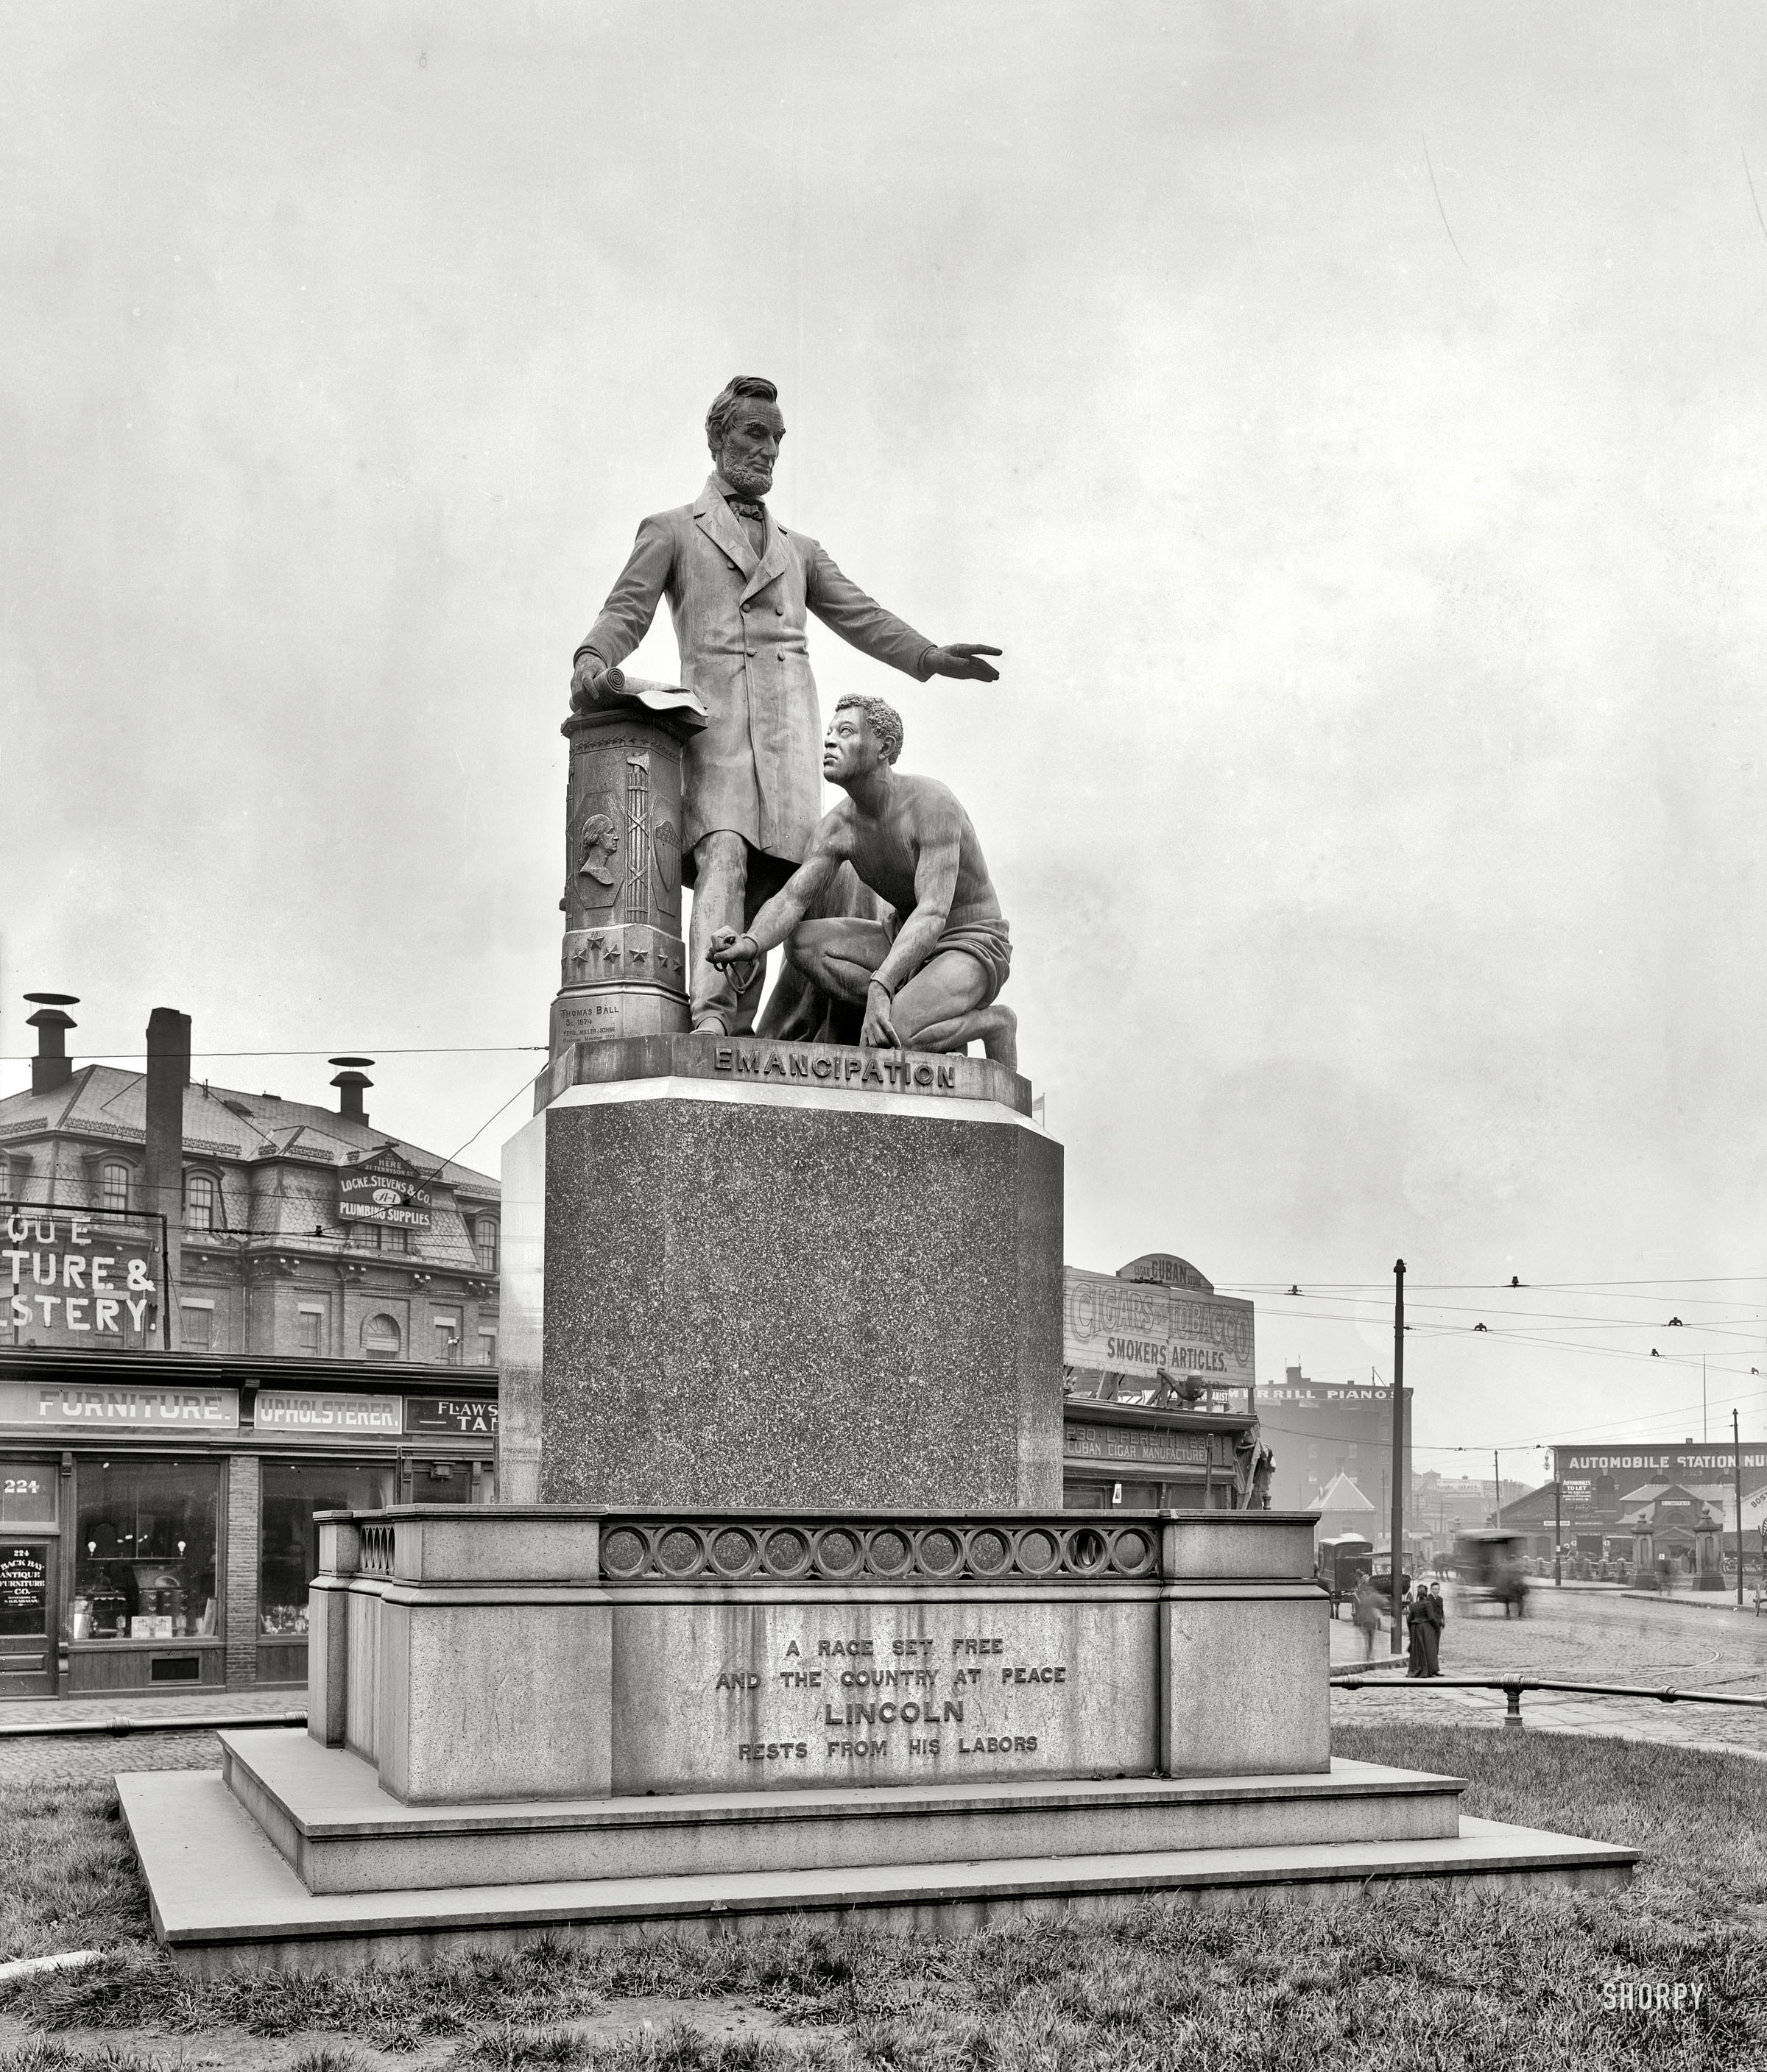 Boston circa 1906. "Lincoln statue, Park Square." An interesting juxtaposition of Emancipation and Plumbing Supplies. 8x10 glass negative. View full size.